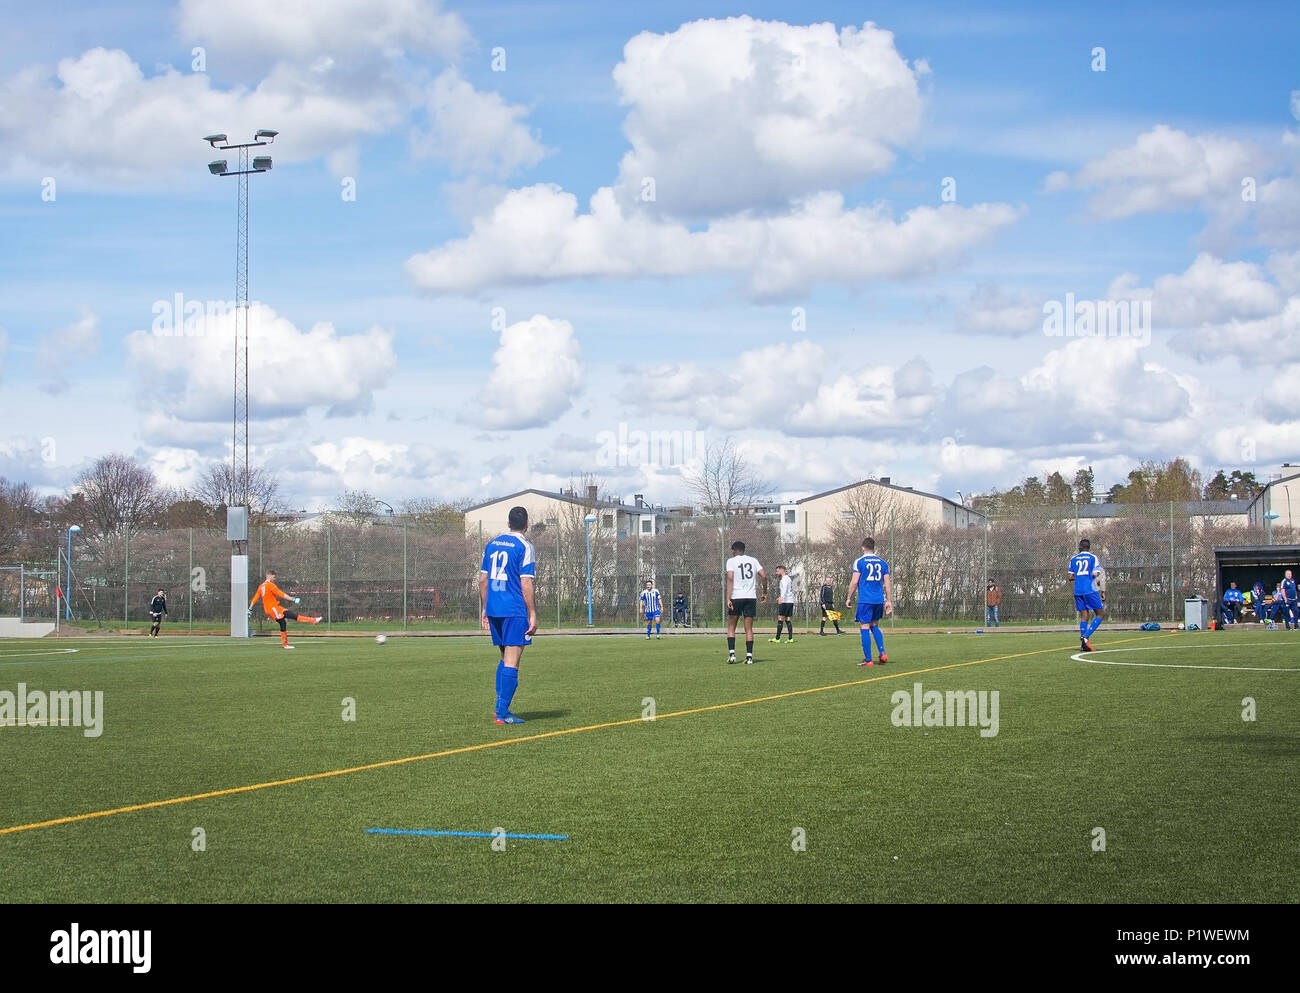 STOCKHOLM, SWEDEN - APRIL 28, 2018: Soccer football game on artificial grass in 4 division north Spanga IP on April 28, 2018 in Stockholm, Sweden. Stock Photo